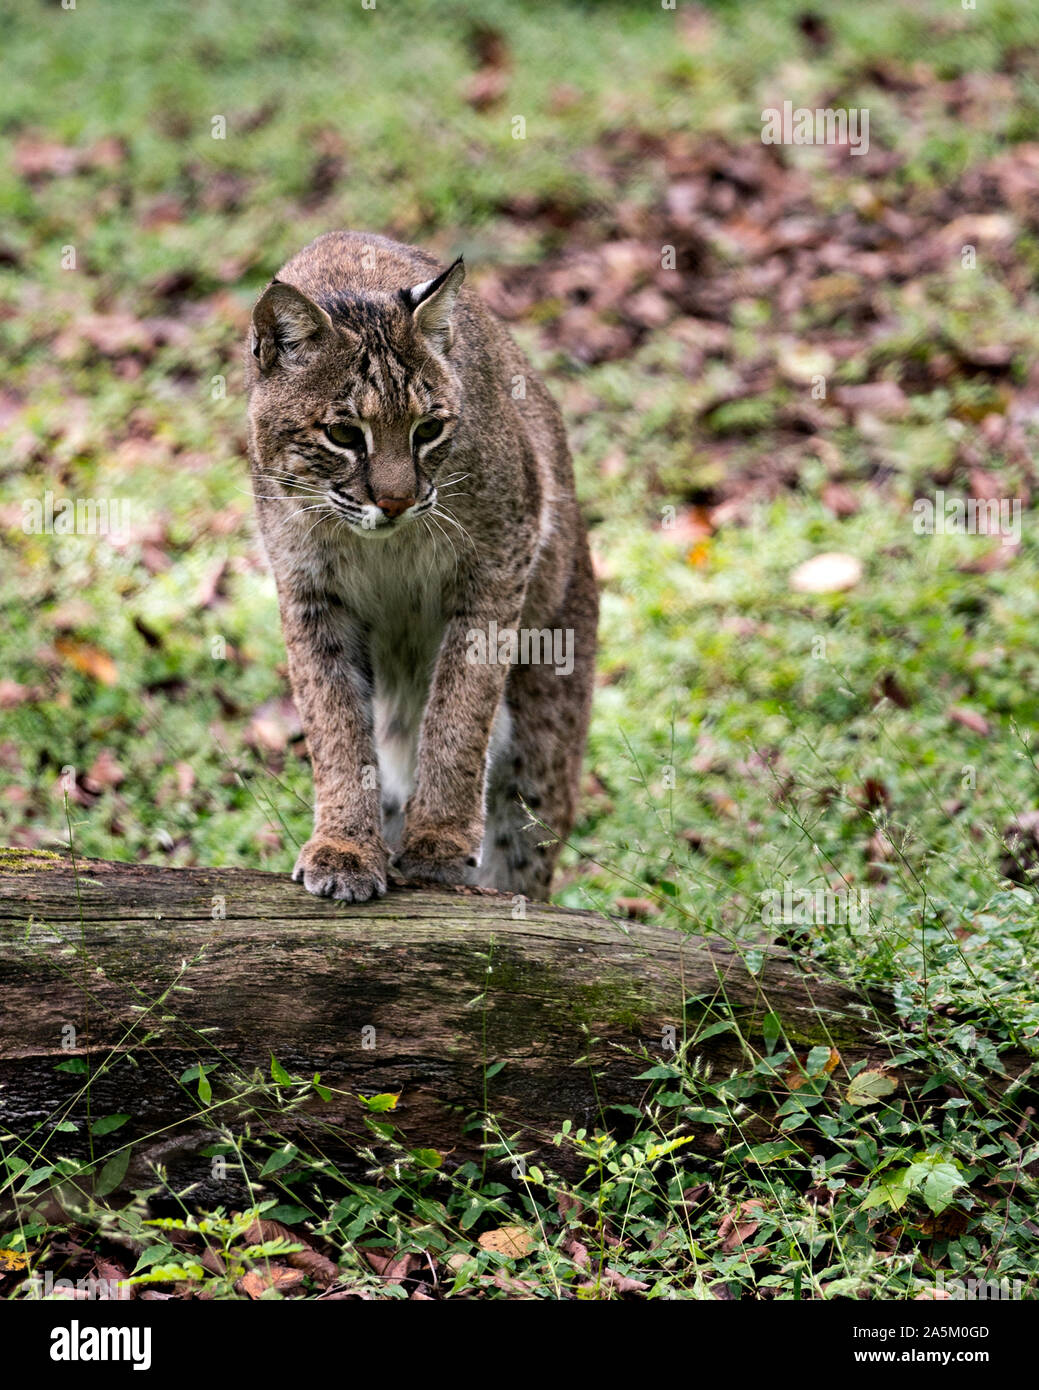 Bobcat walking at you displaying its body, head, eyes, ears, nose, feet with a nice background of foliage in its surrounding and environment. Stock Photo